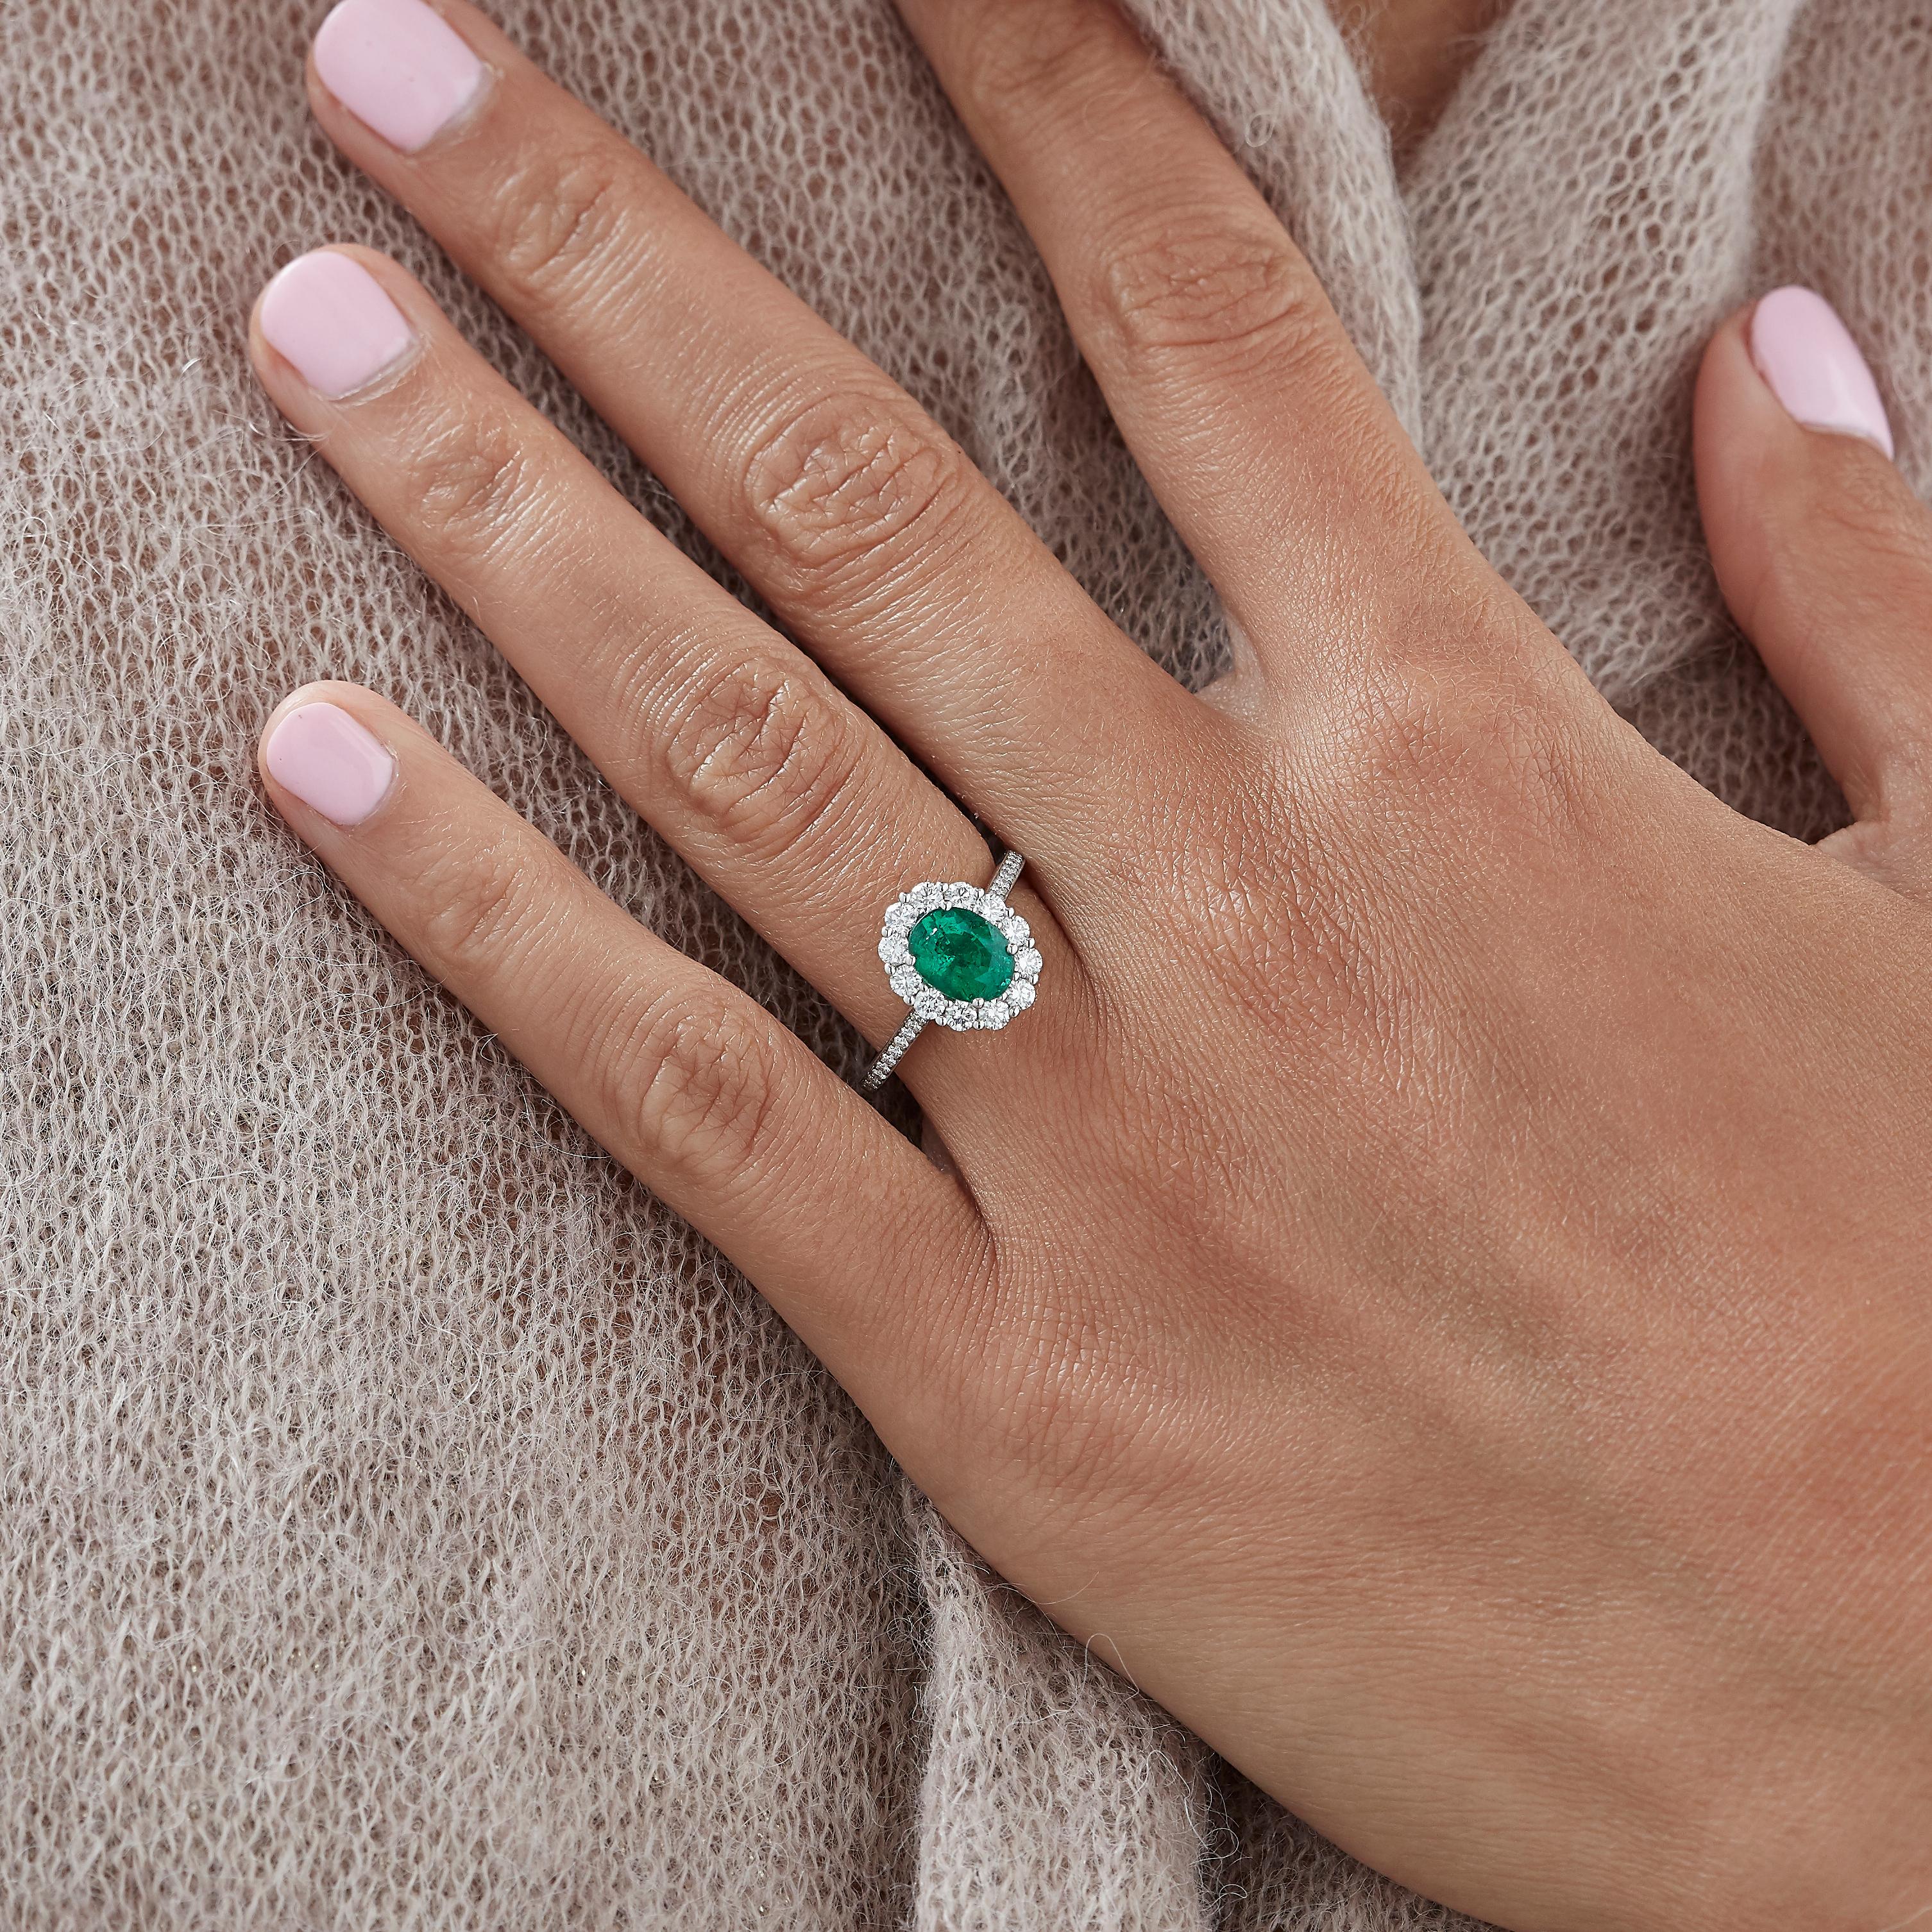 A House of Garrard platinum ring from the 'Garrard 1735' collection, set with a central oval emerald and round white diamonds.

1 oval emerald approx 1.35ct
30 round white diamonds weighing 0.60cts
Total diamond weight: 0.60cts   
Size: 51

Please